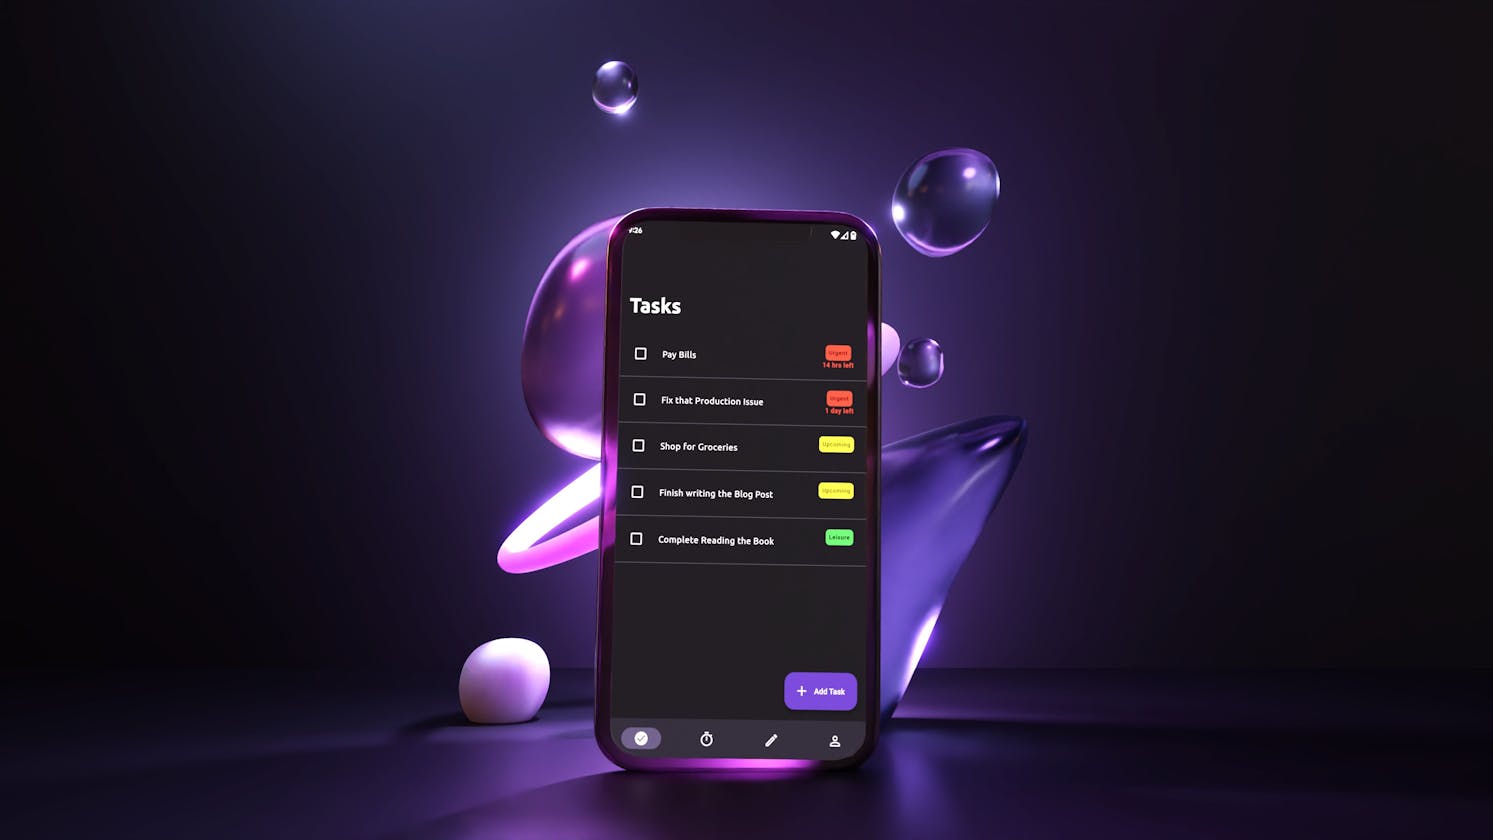 Introducing ToDoRo: The Task Management App that Does the Thinking for You